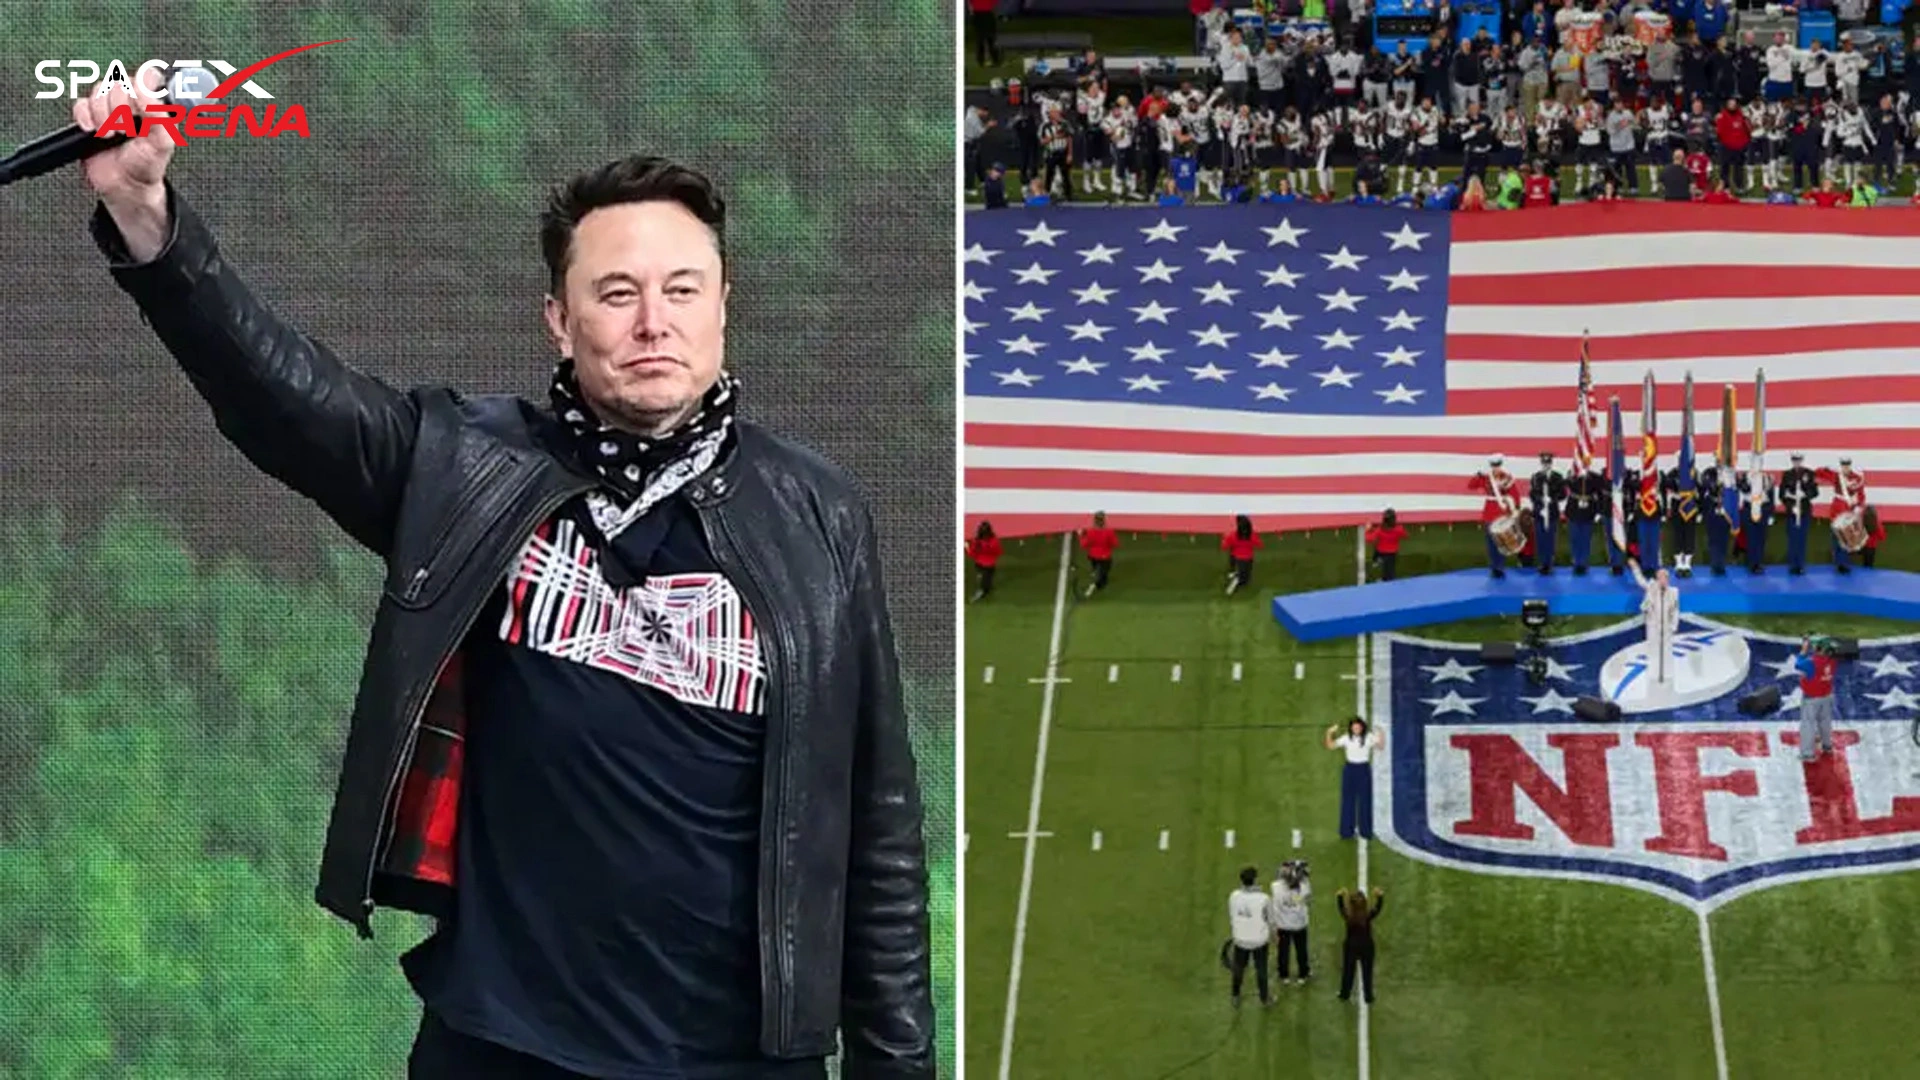 ‘Change of Plans’: Elon Musk to Sing National Anthem at Super Bowl Instead of Jason Aldean and Oliver Anthony